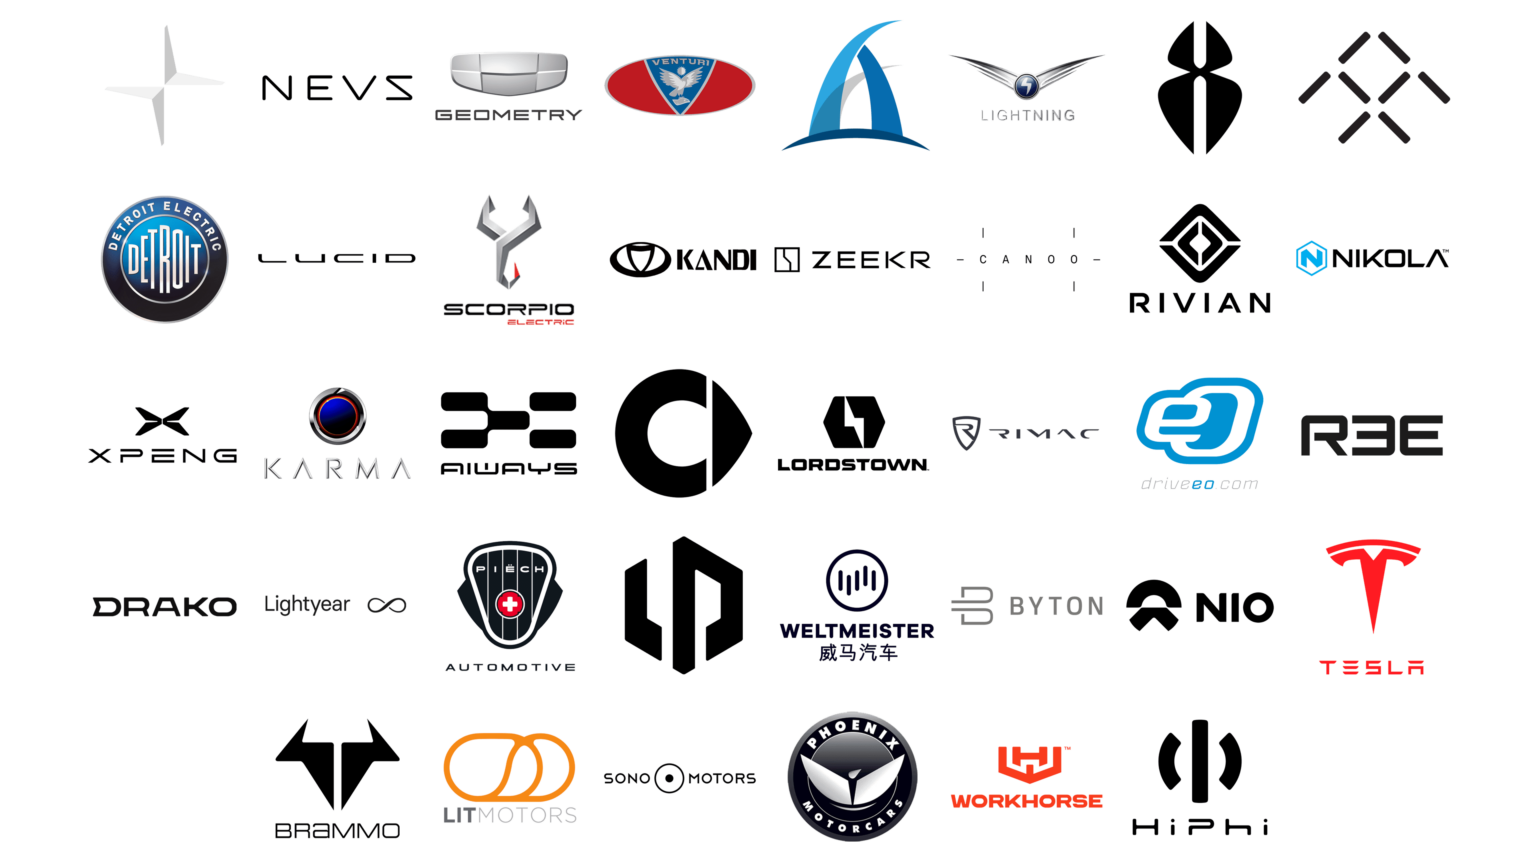 Electric Car Brands and sign, new logo meaning and history, PNG, SVG